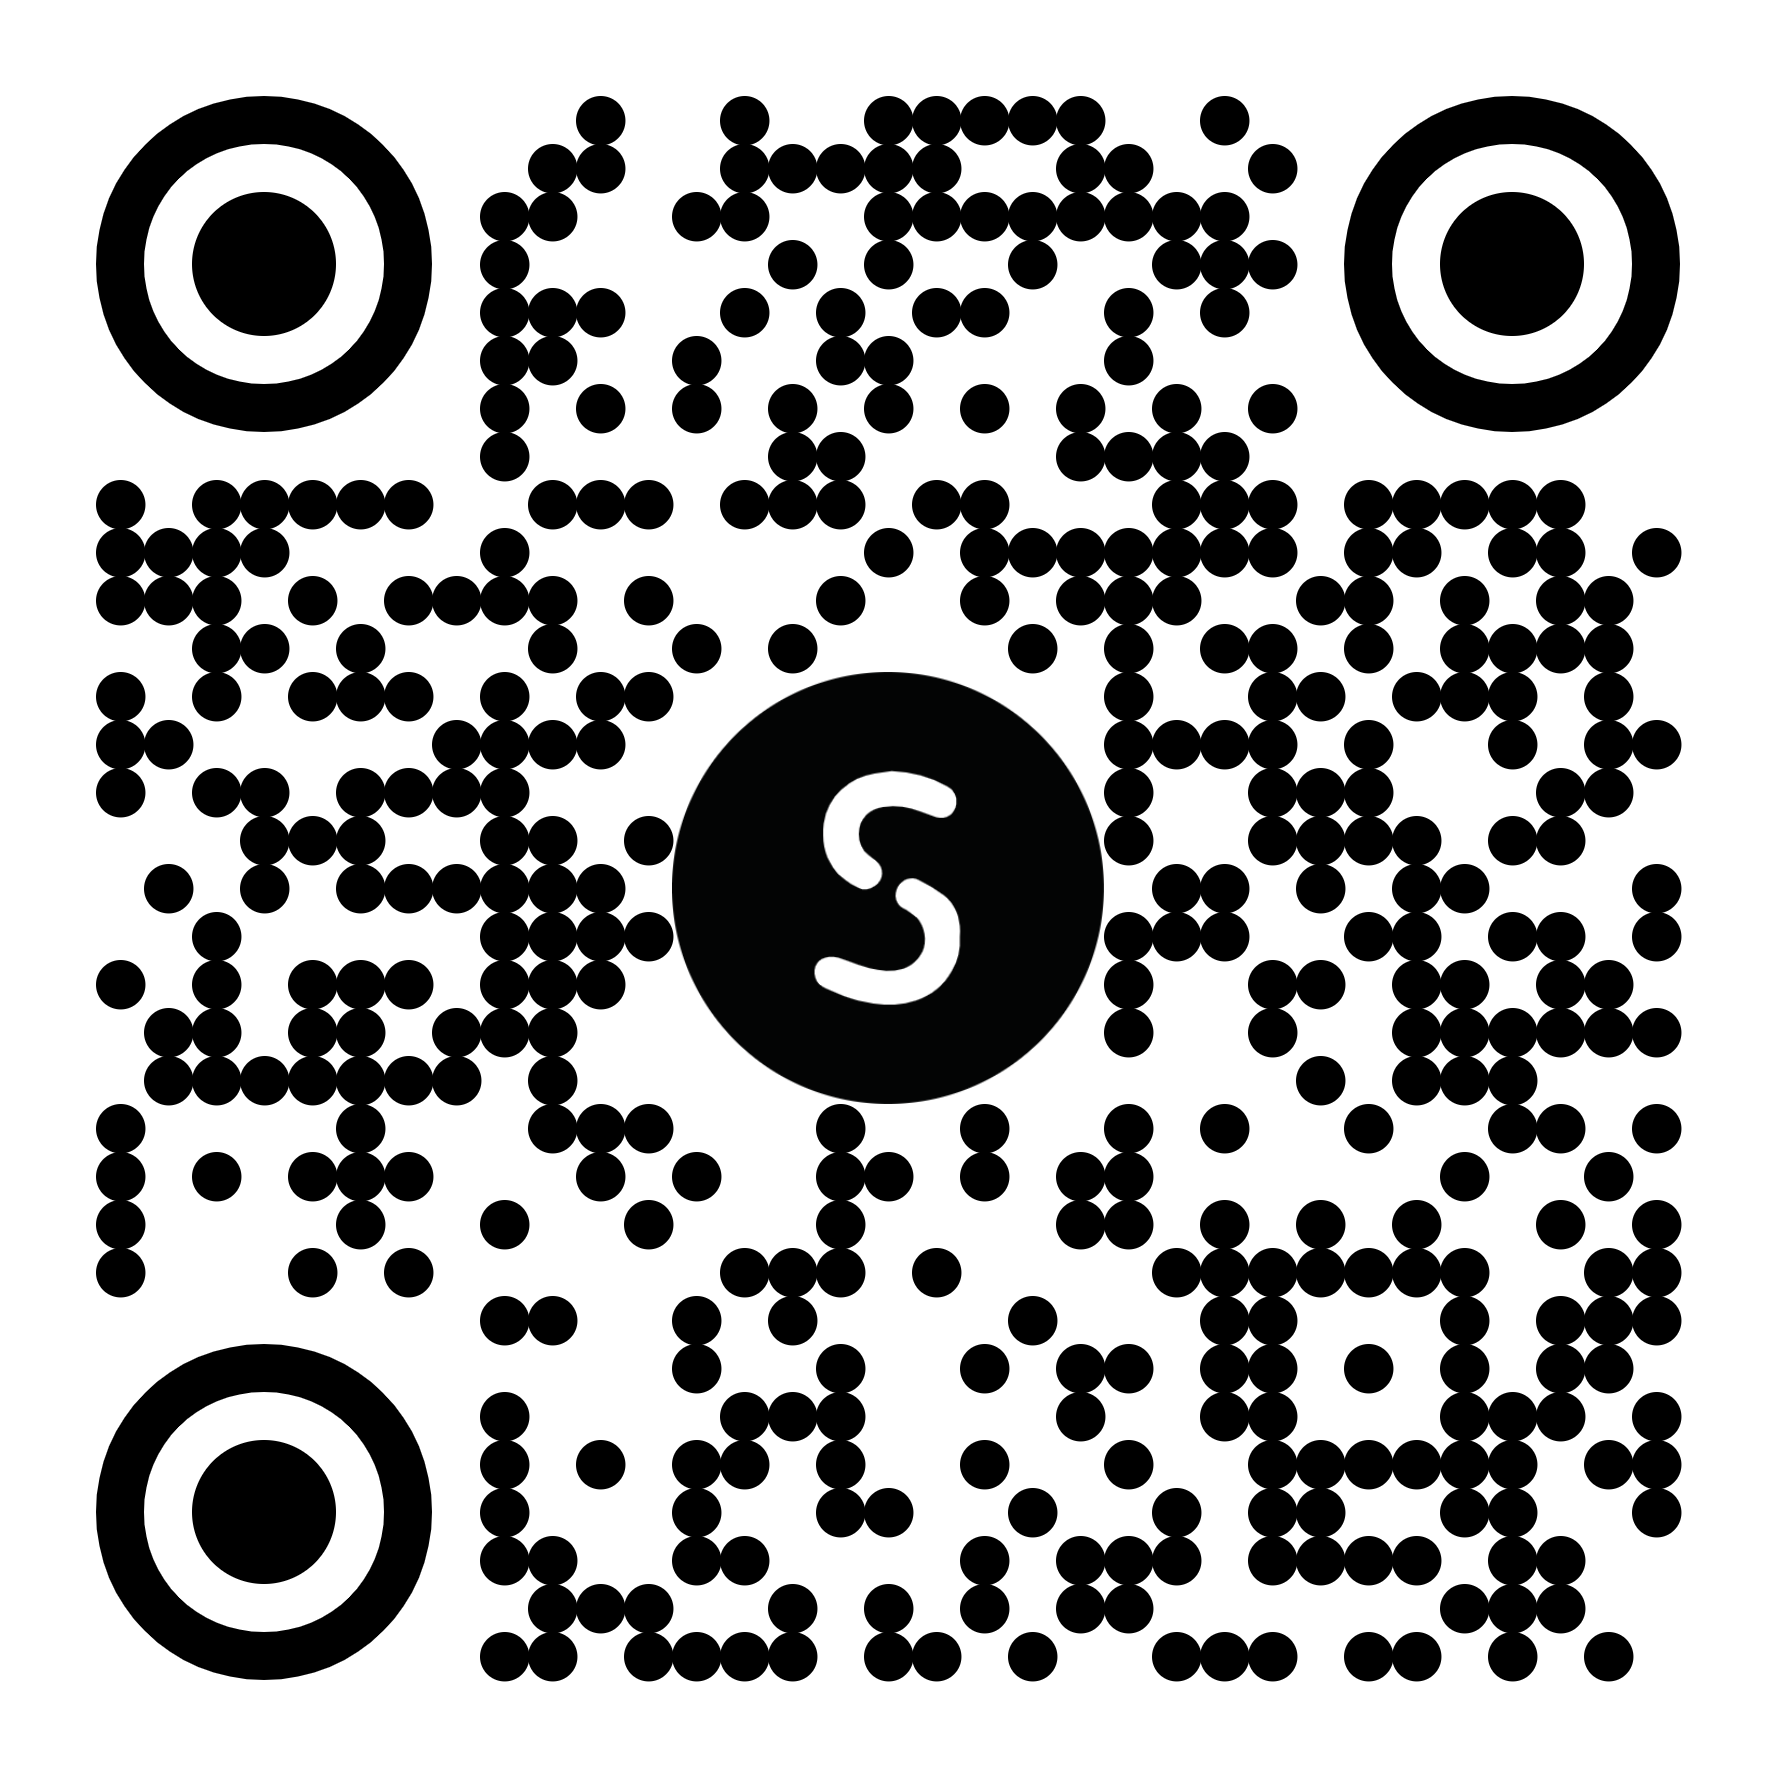 QR code for Self in the Apple App Store